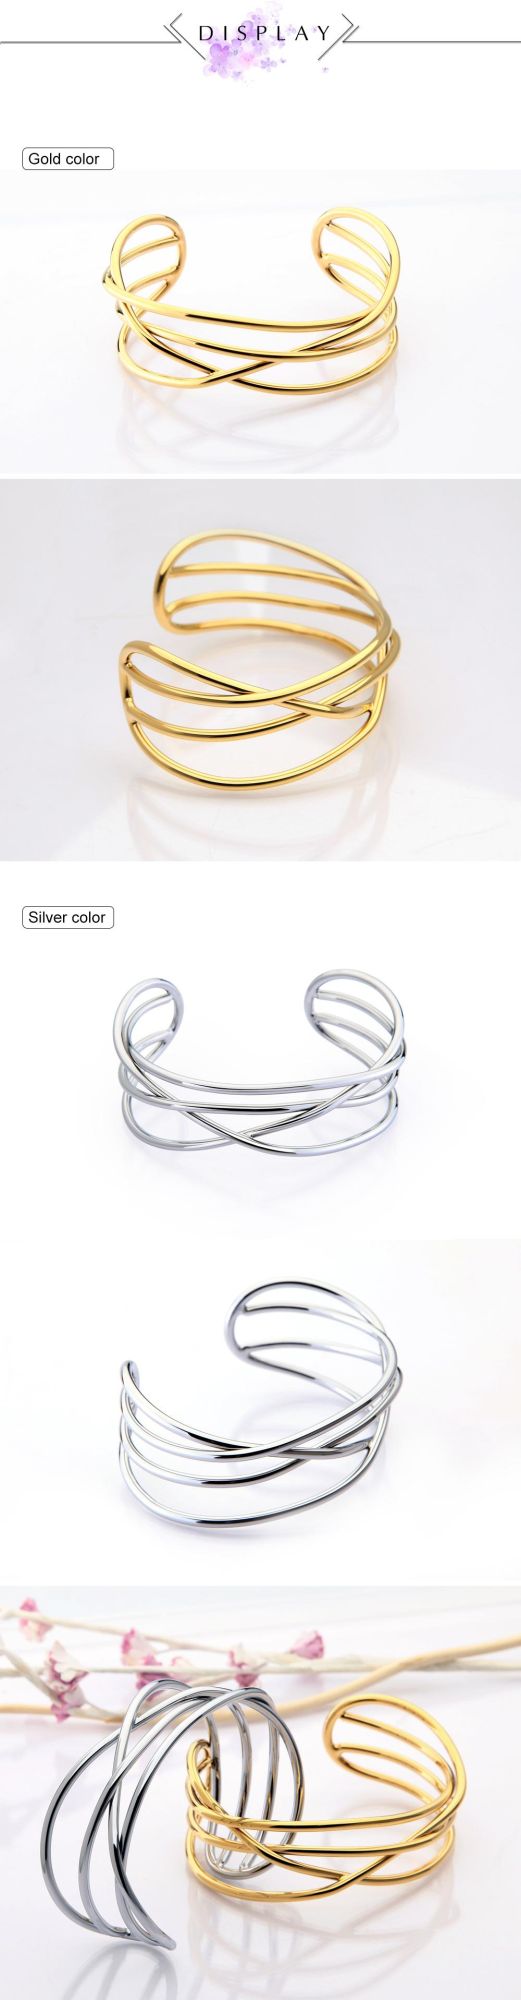 China Factory Fashion Bird′ S Nest Designs Factory Prices Copper Bracelets